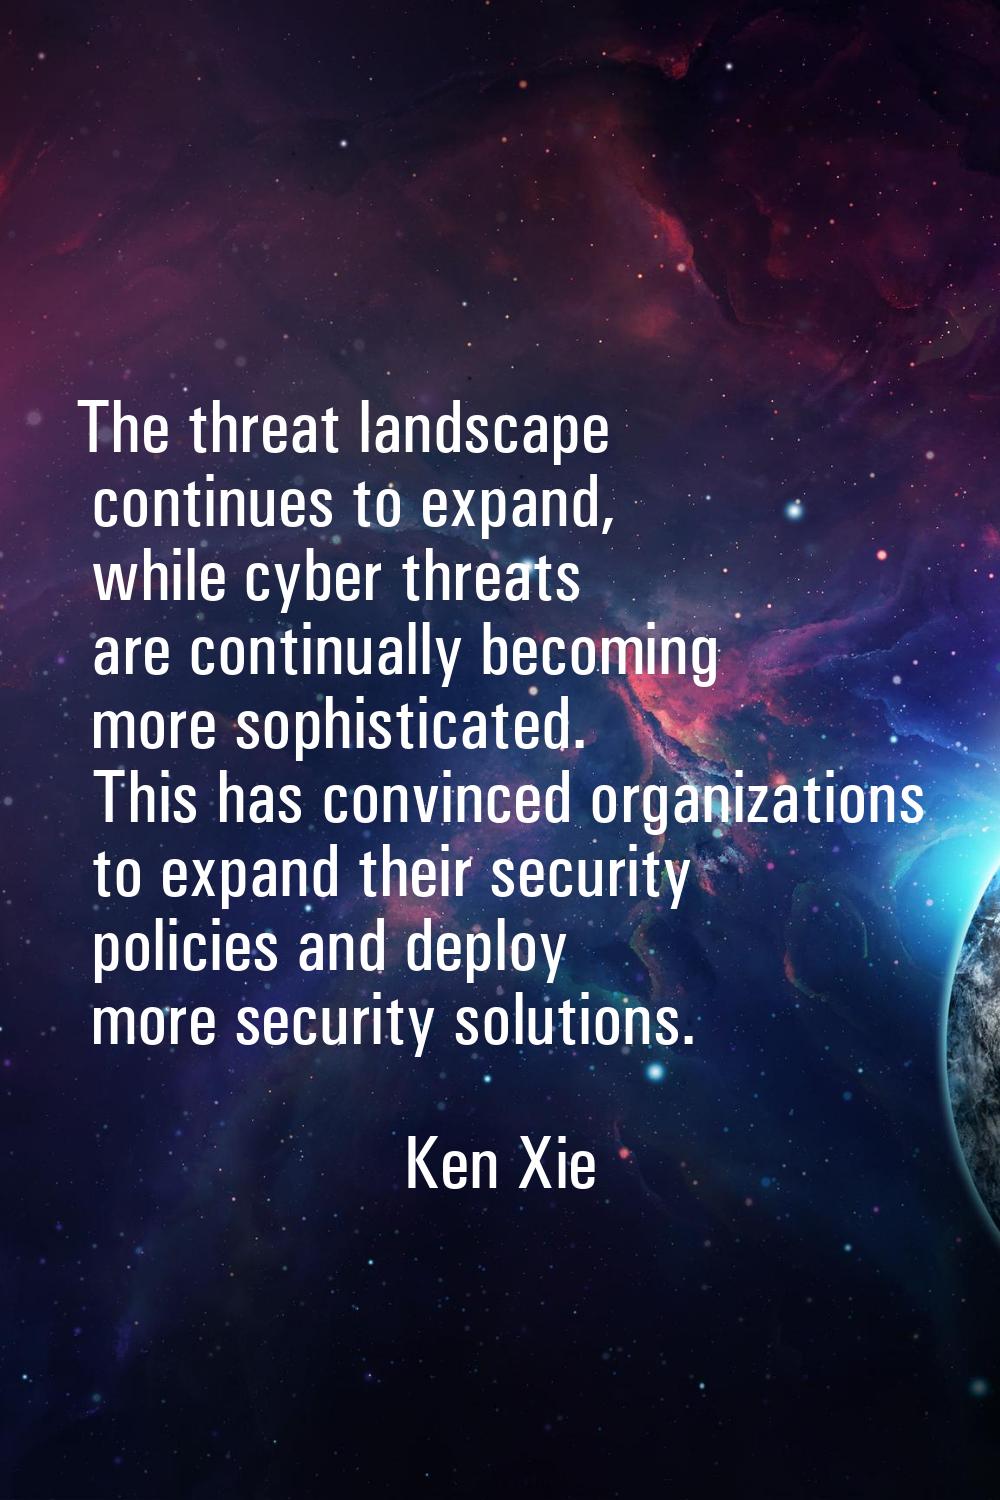 The threat landscape continues to expand, while cyber threats are continually becoming more sophist